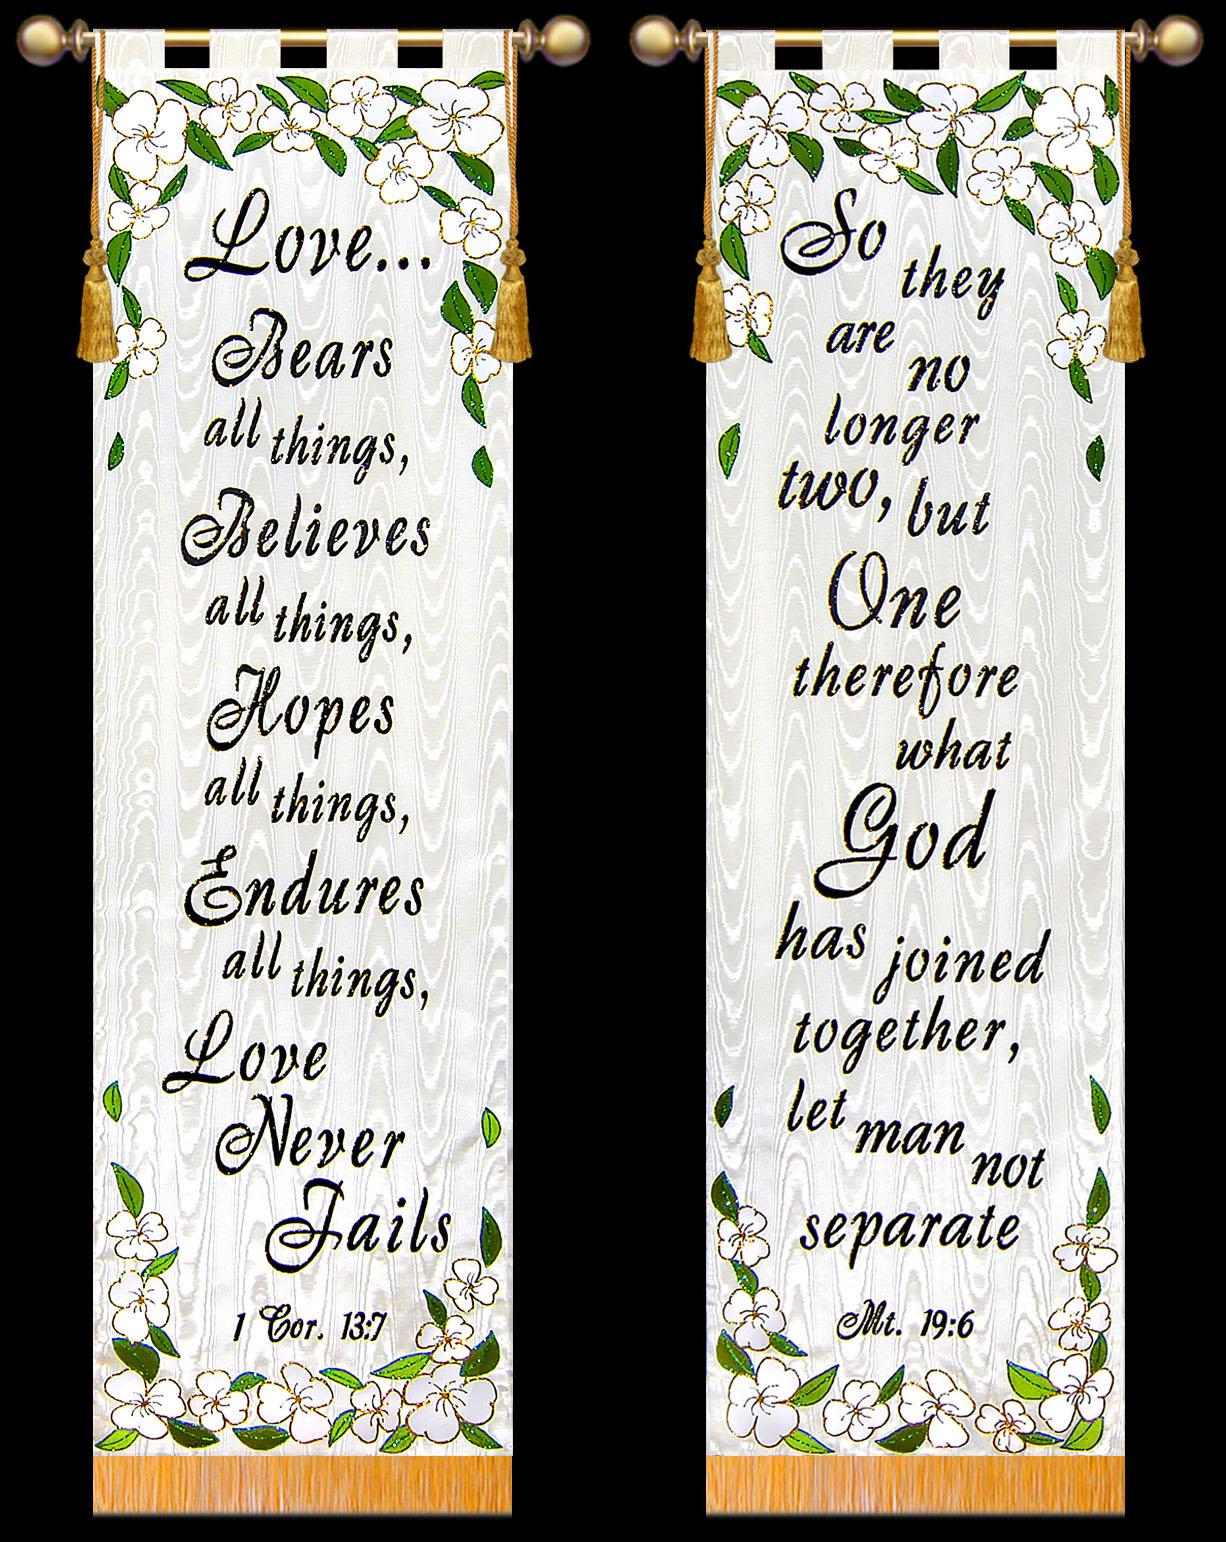 Nice set of Church Wedding Banners that can decorate your church for a wedding